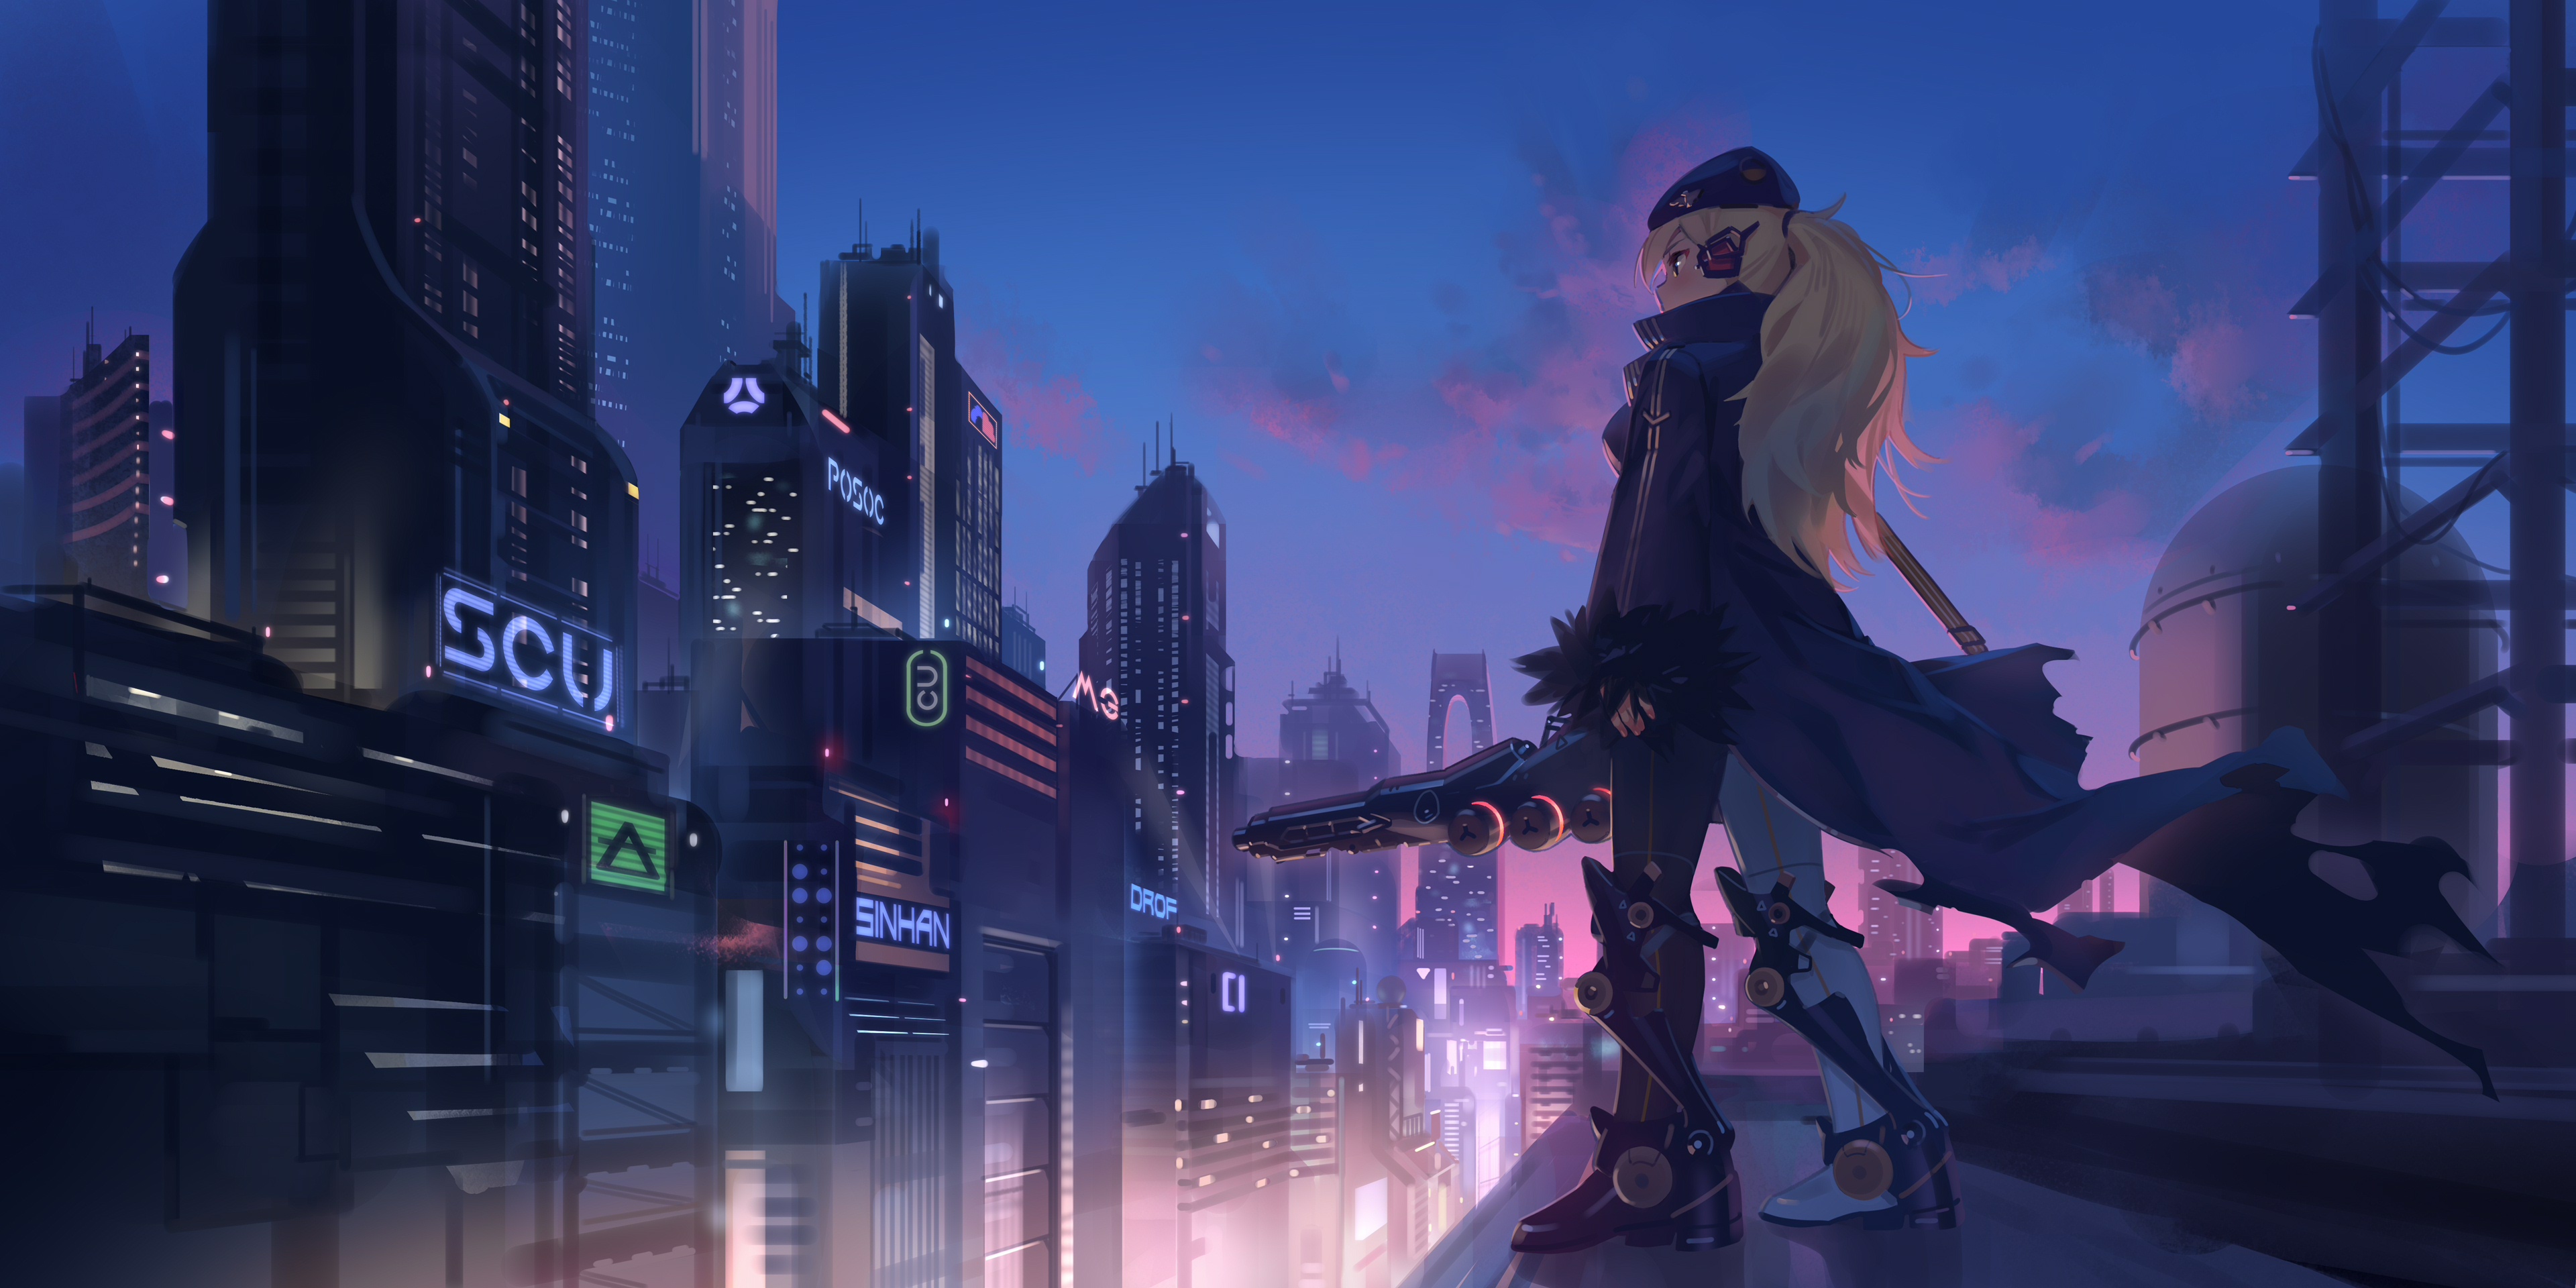 Anime Girl In City 4k Hd Anime 4k Wallpapers Images Backgrounds Photos And Pictures